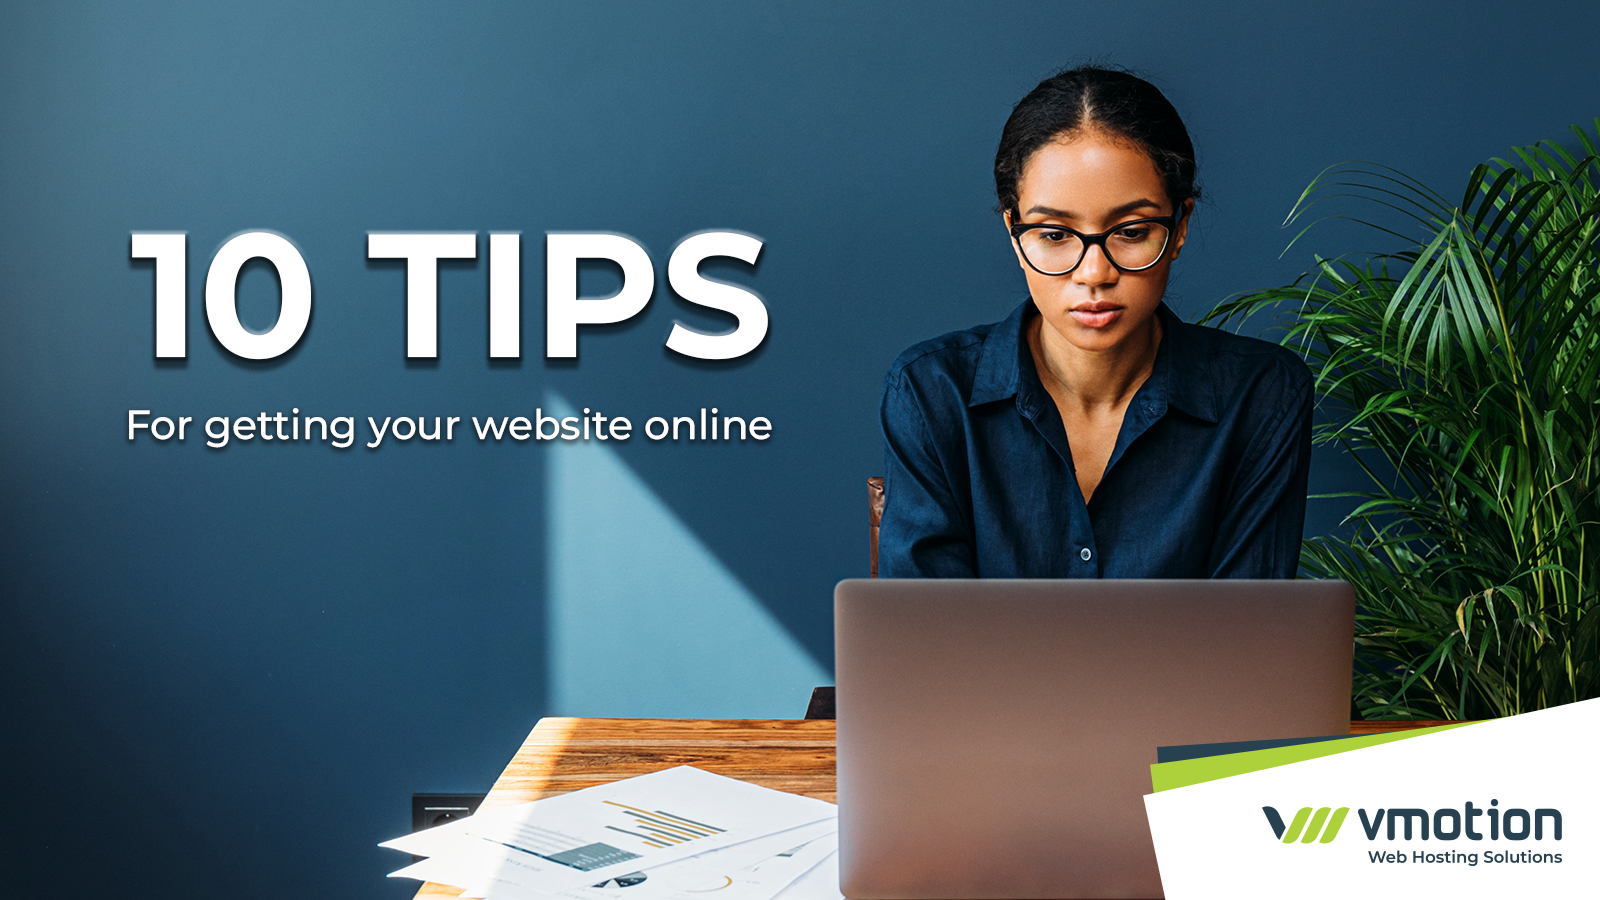 10 Tips for Getting Your Website Online